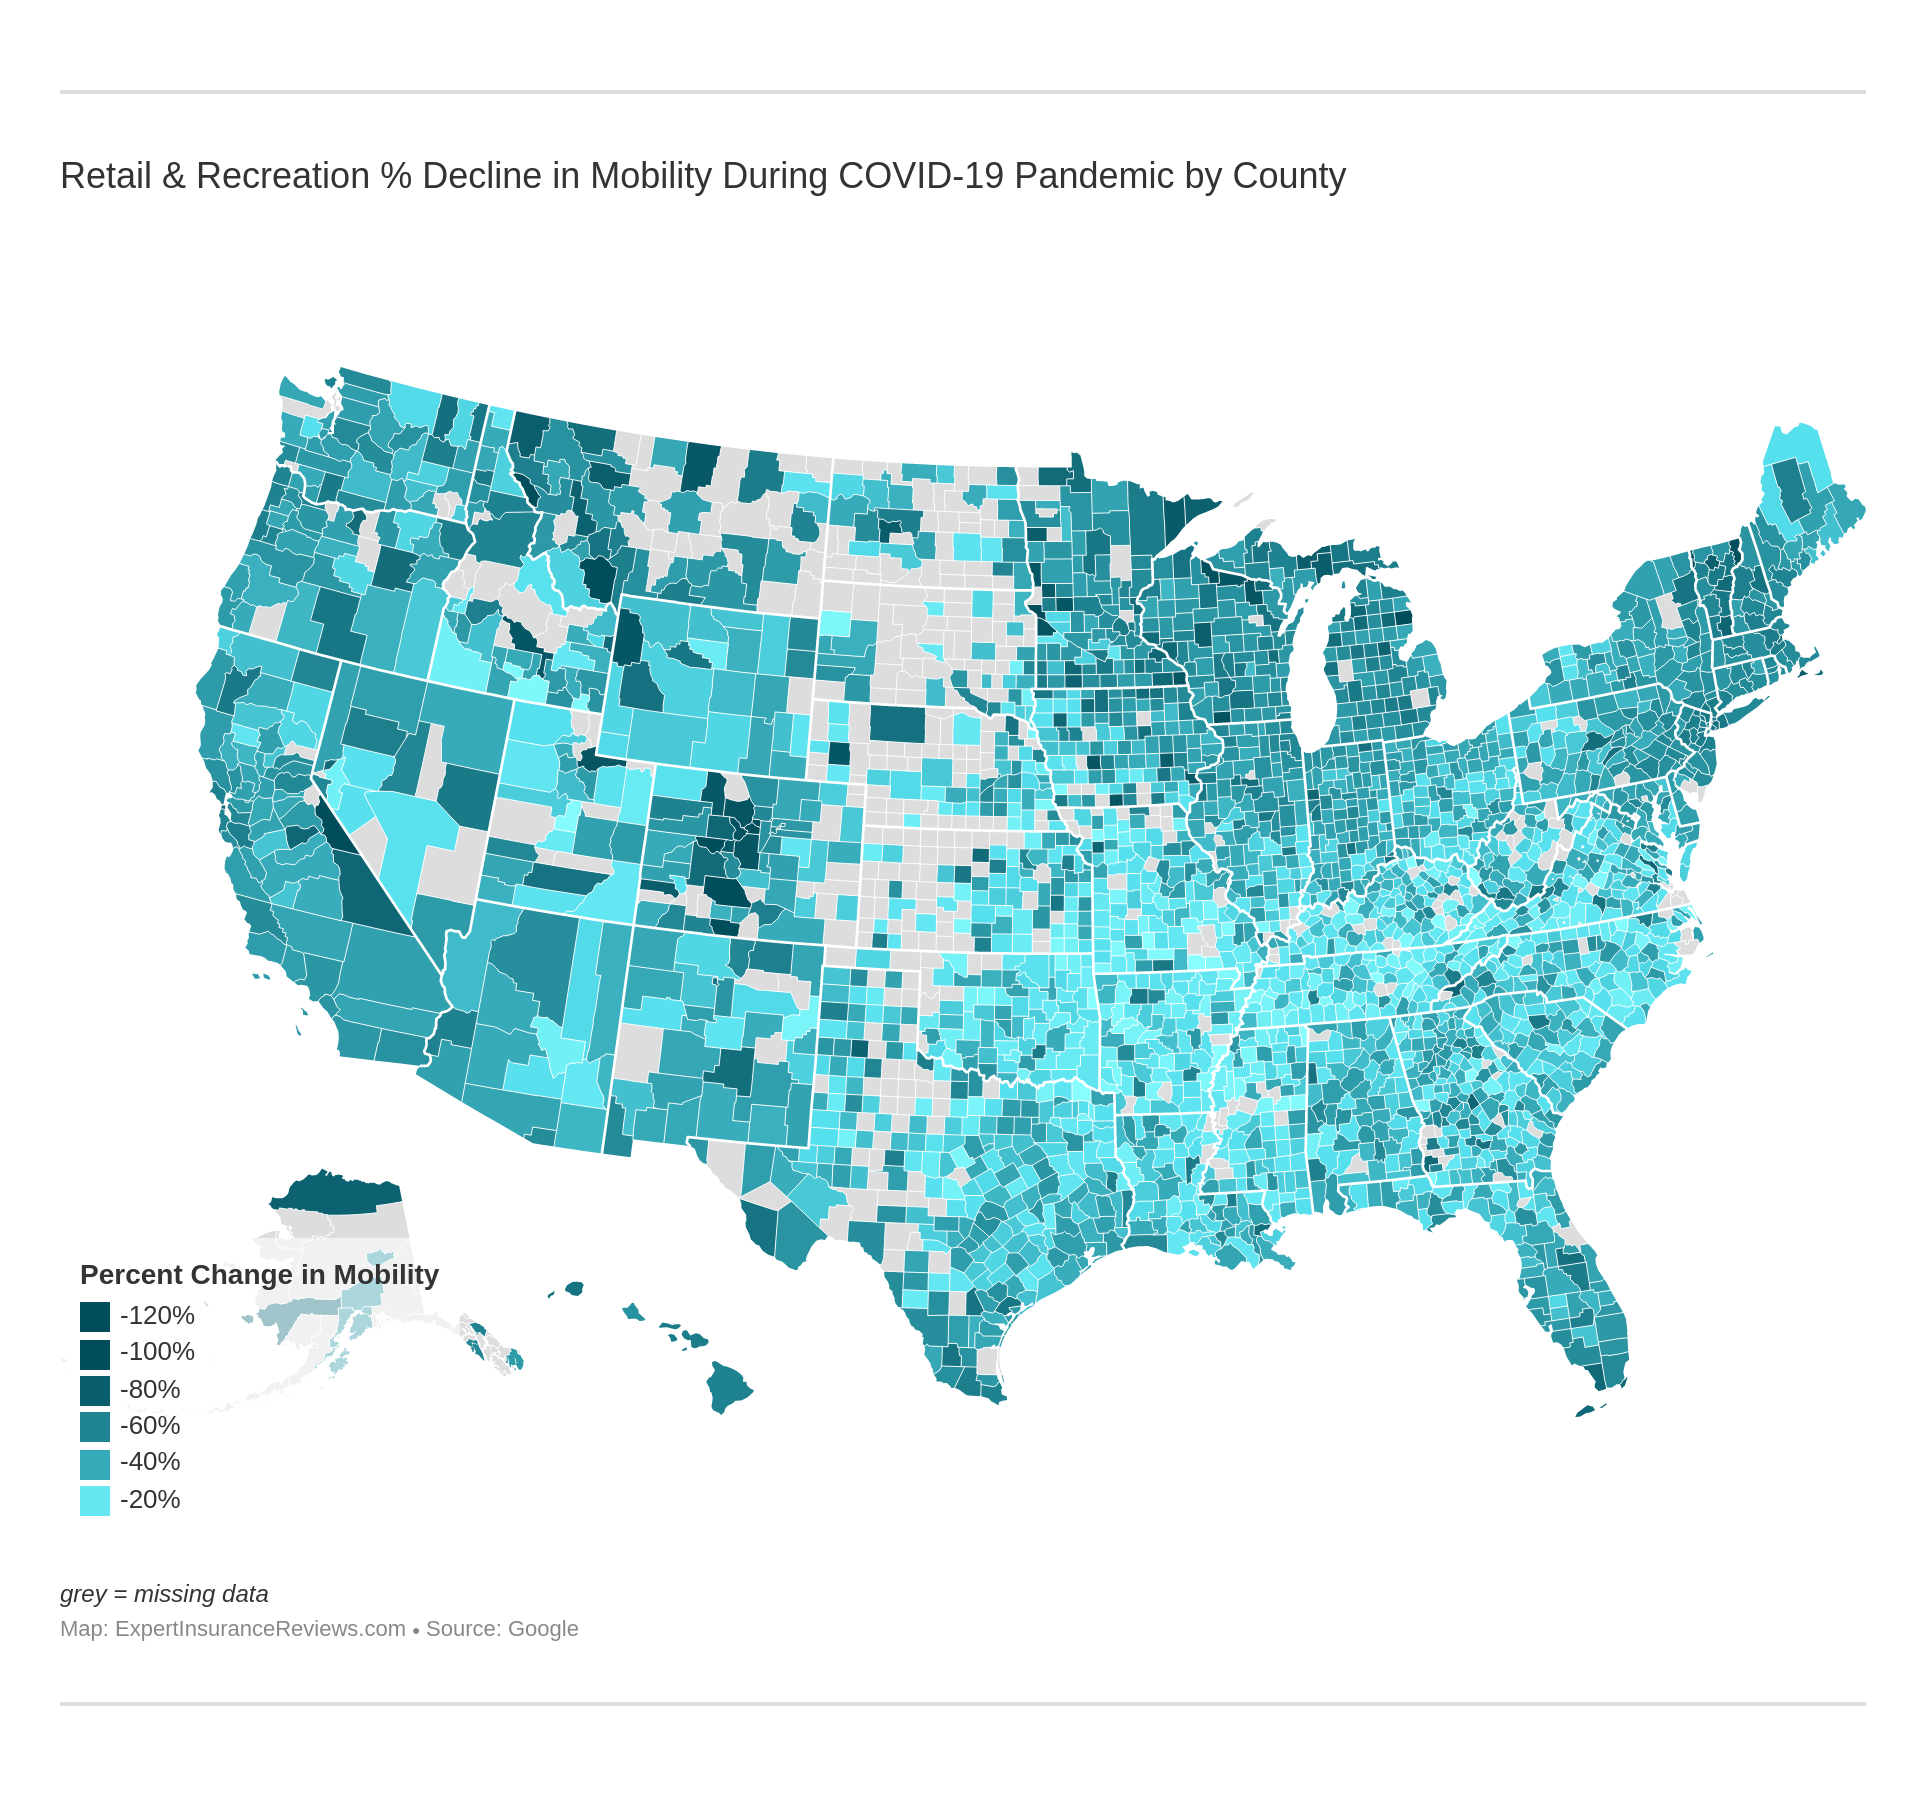 Retail & Recreation % Decline in Mobility During COVID-19 Pandemic by County